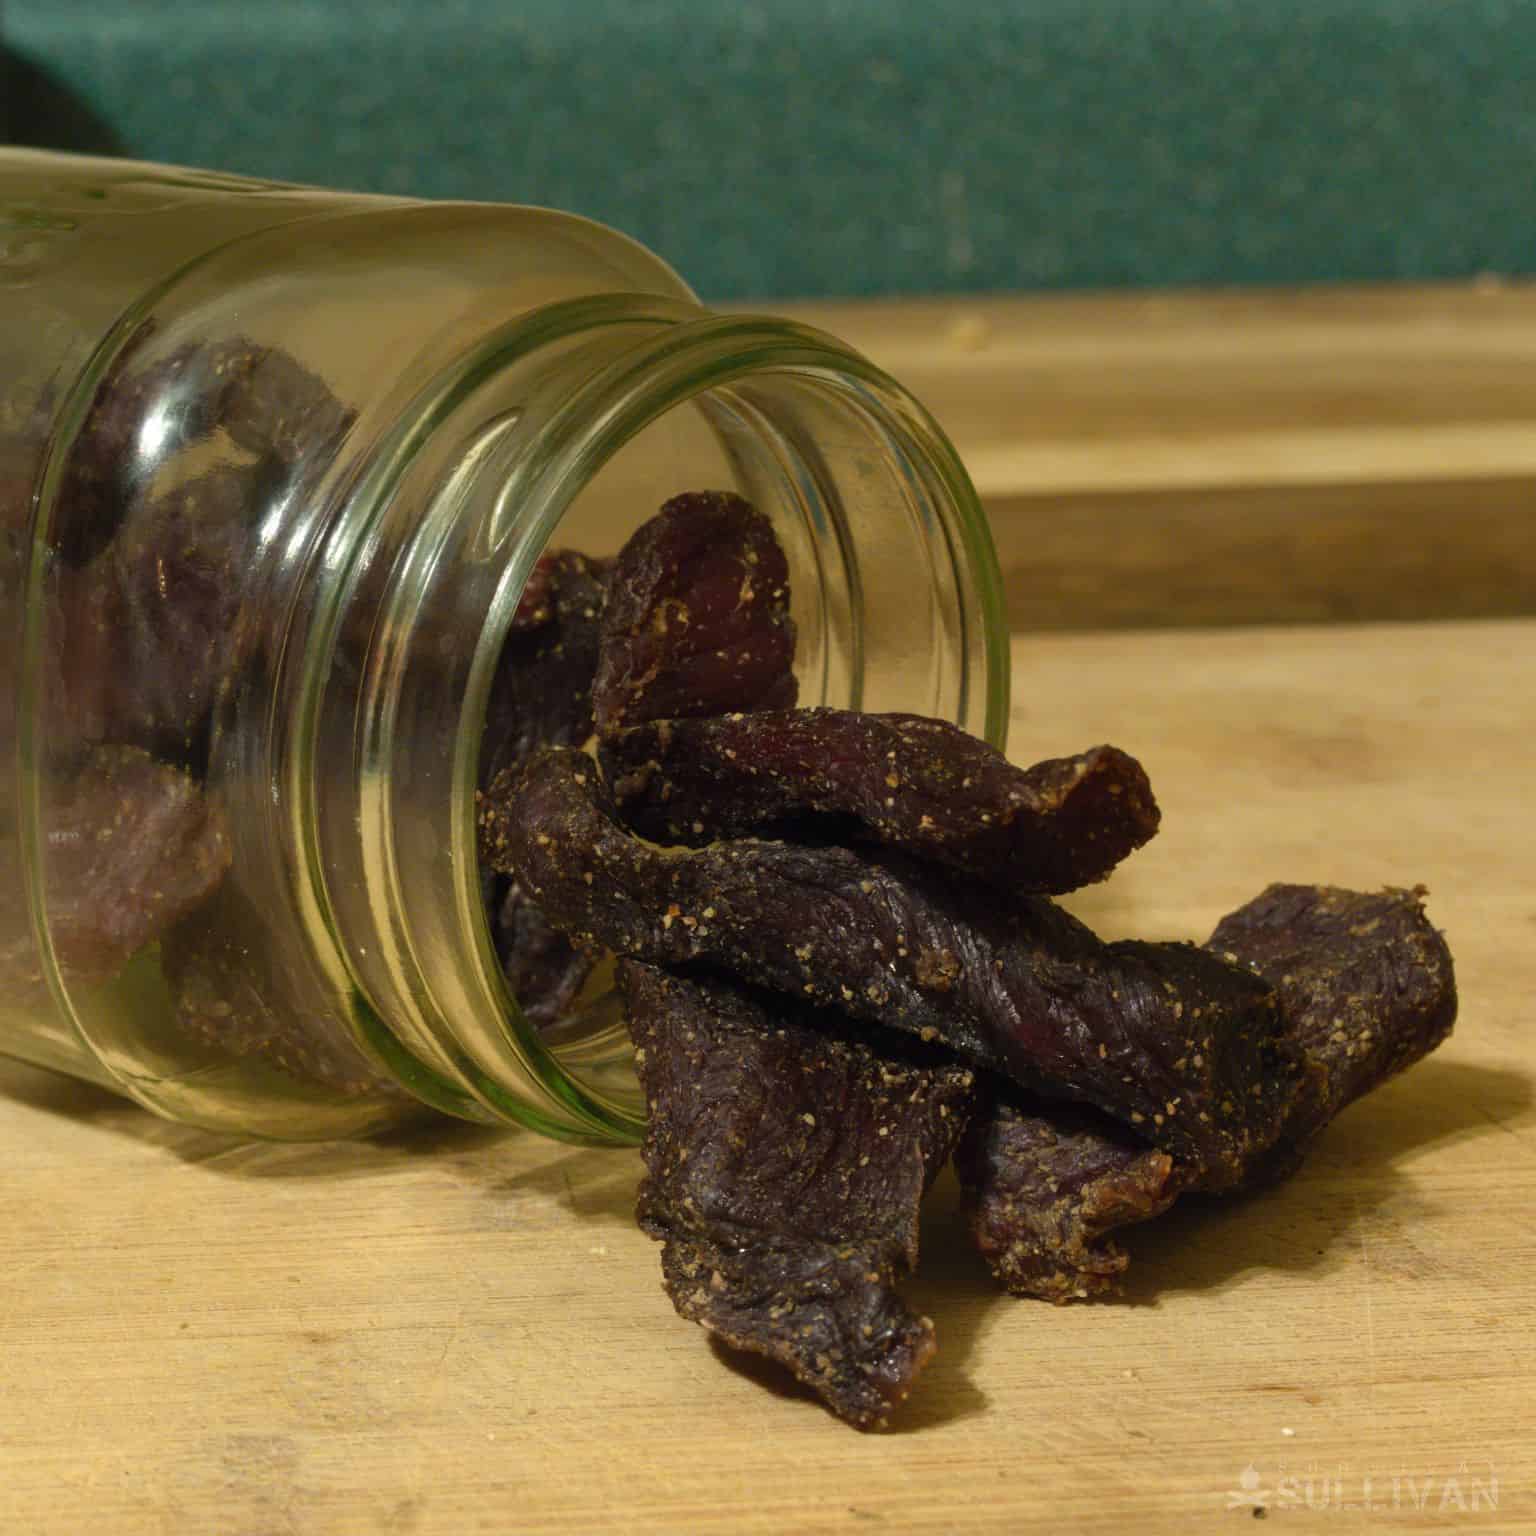 dried beef in oven spilling out of glass jar